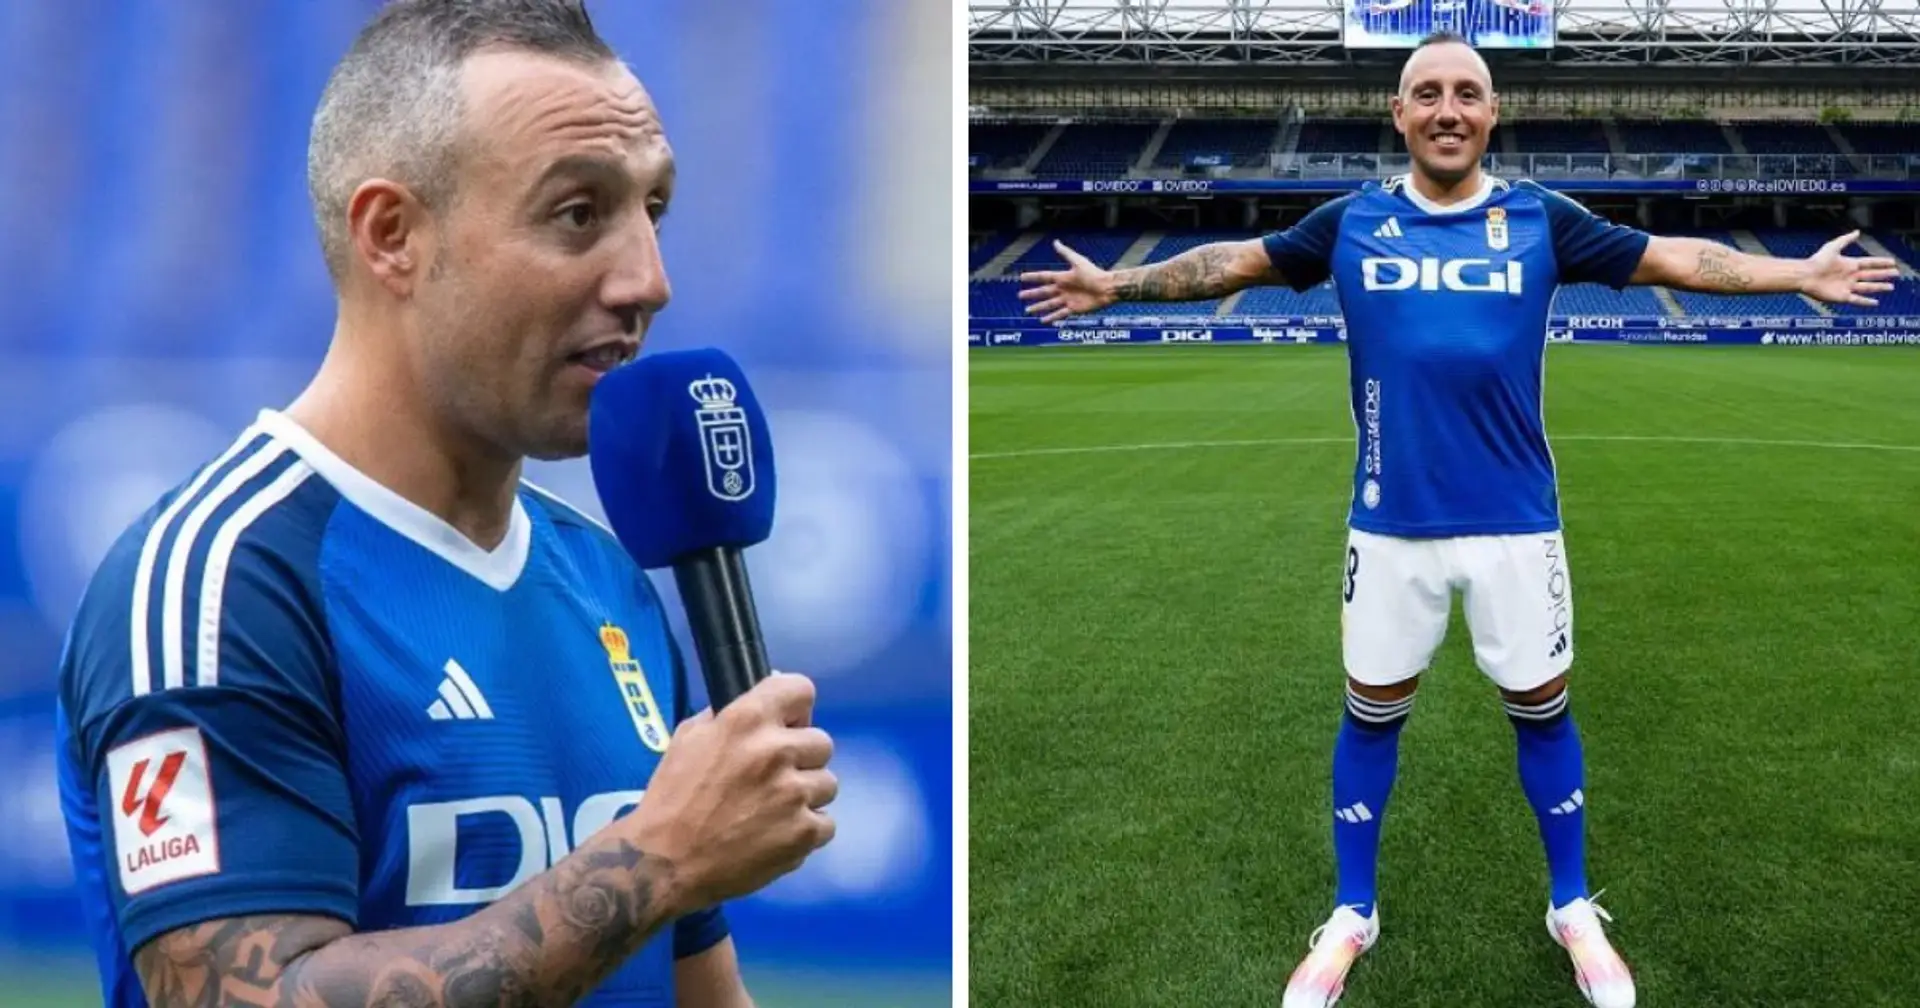 'I don’t want any money': Santi Cazorla wanted to play for free when he returned to Real Oviedo